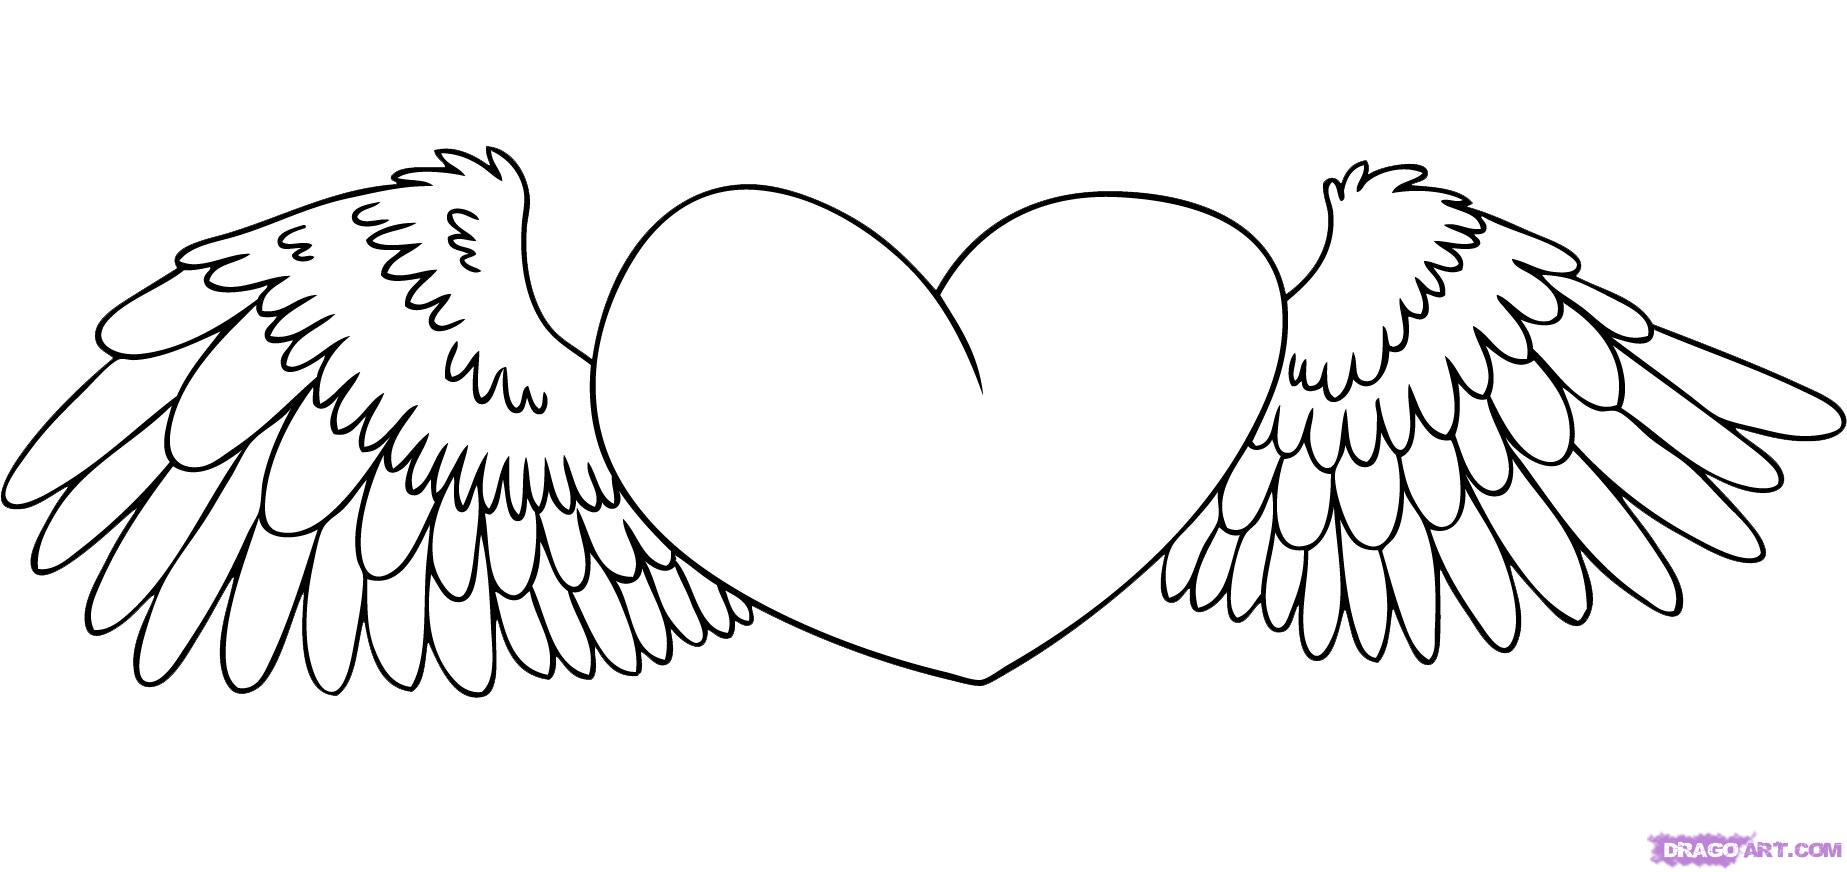 How to Draw a Heart with Wings, Step by Step, Tattoos, Pop Culture ...